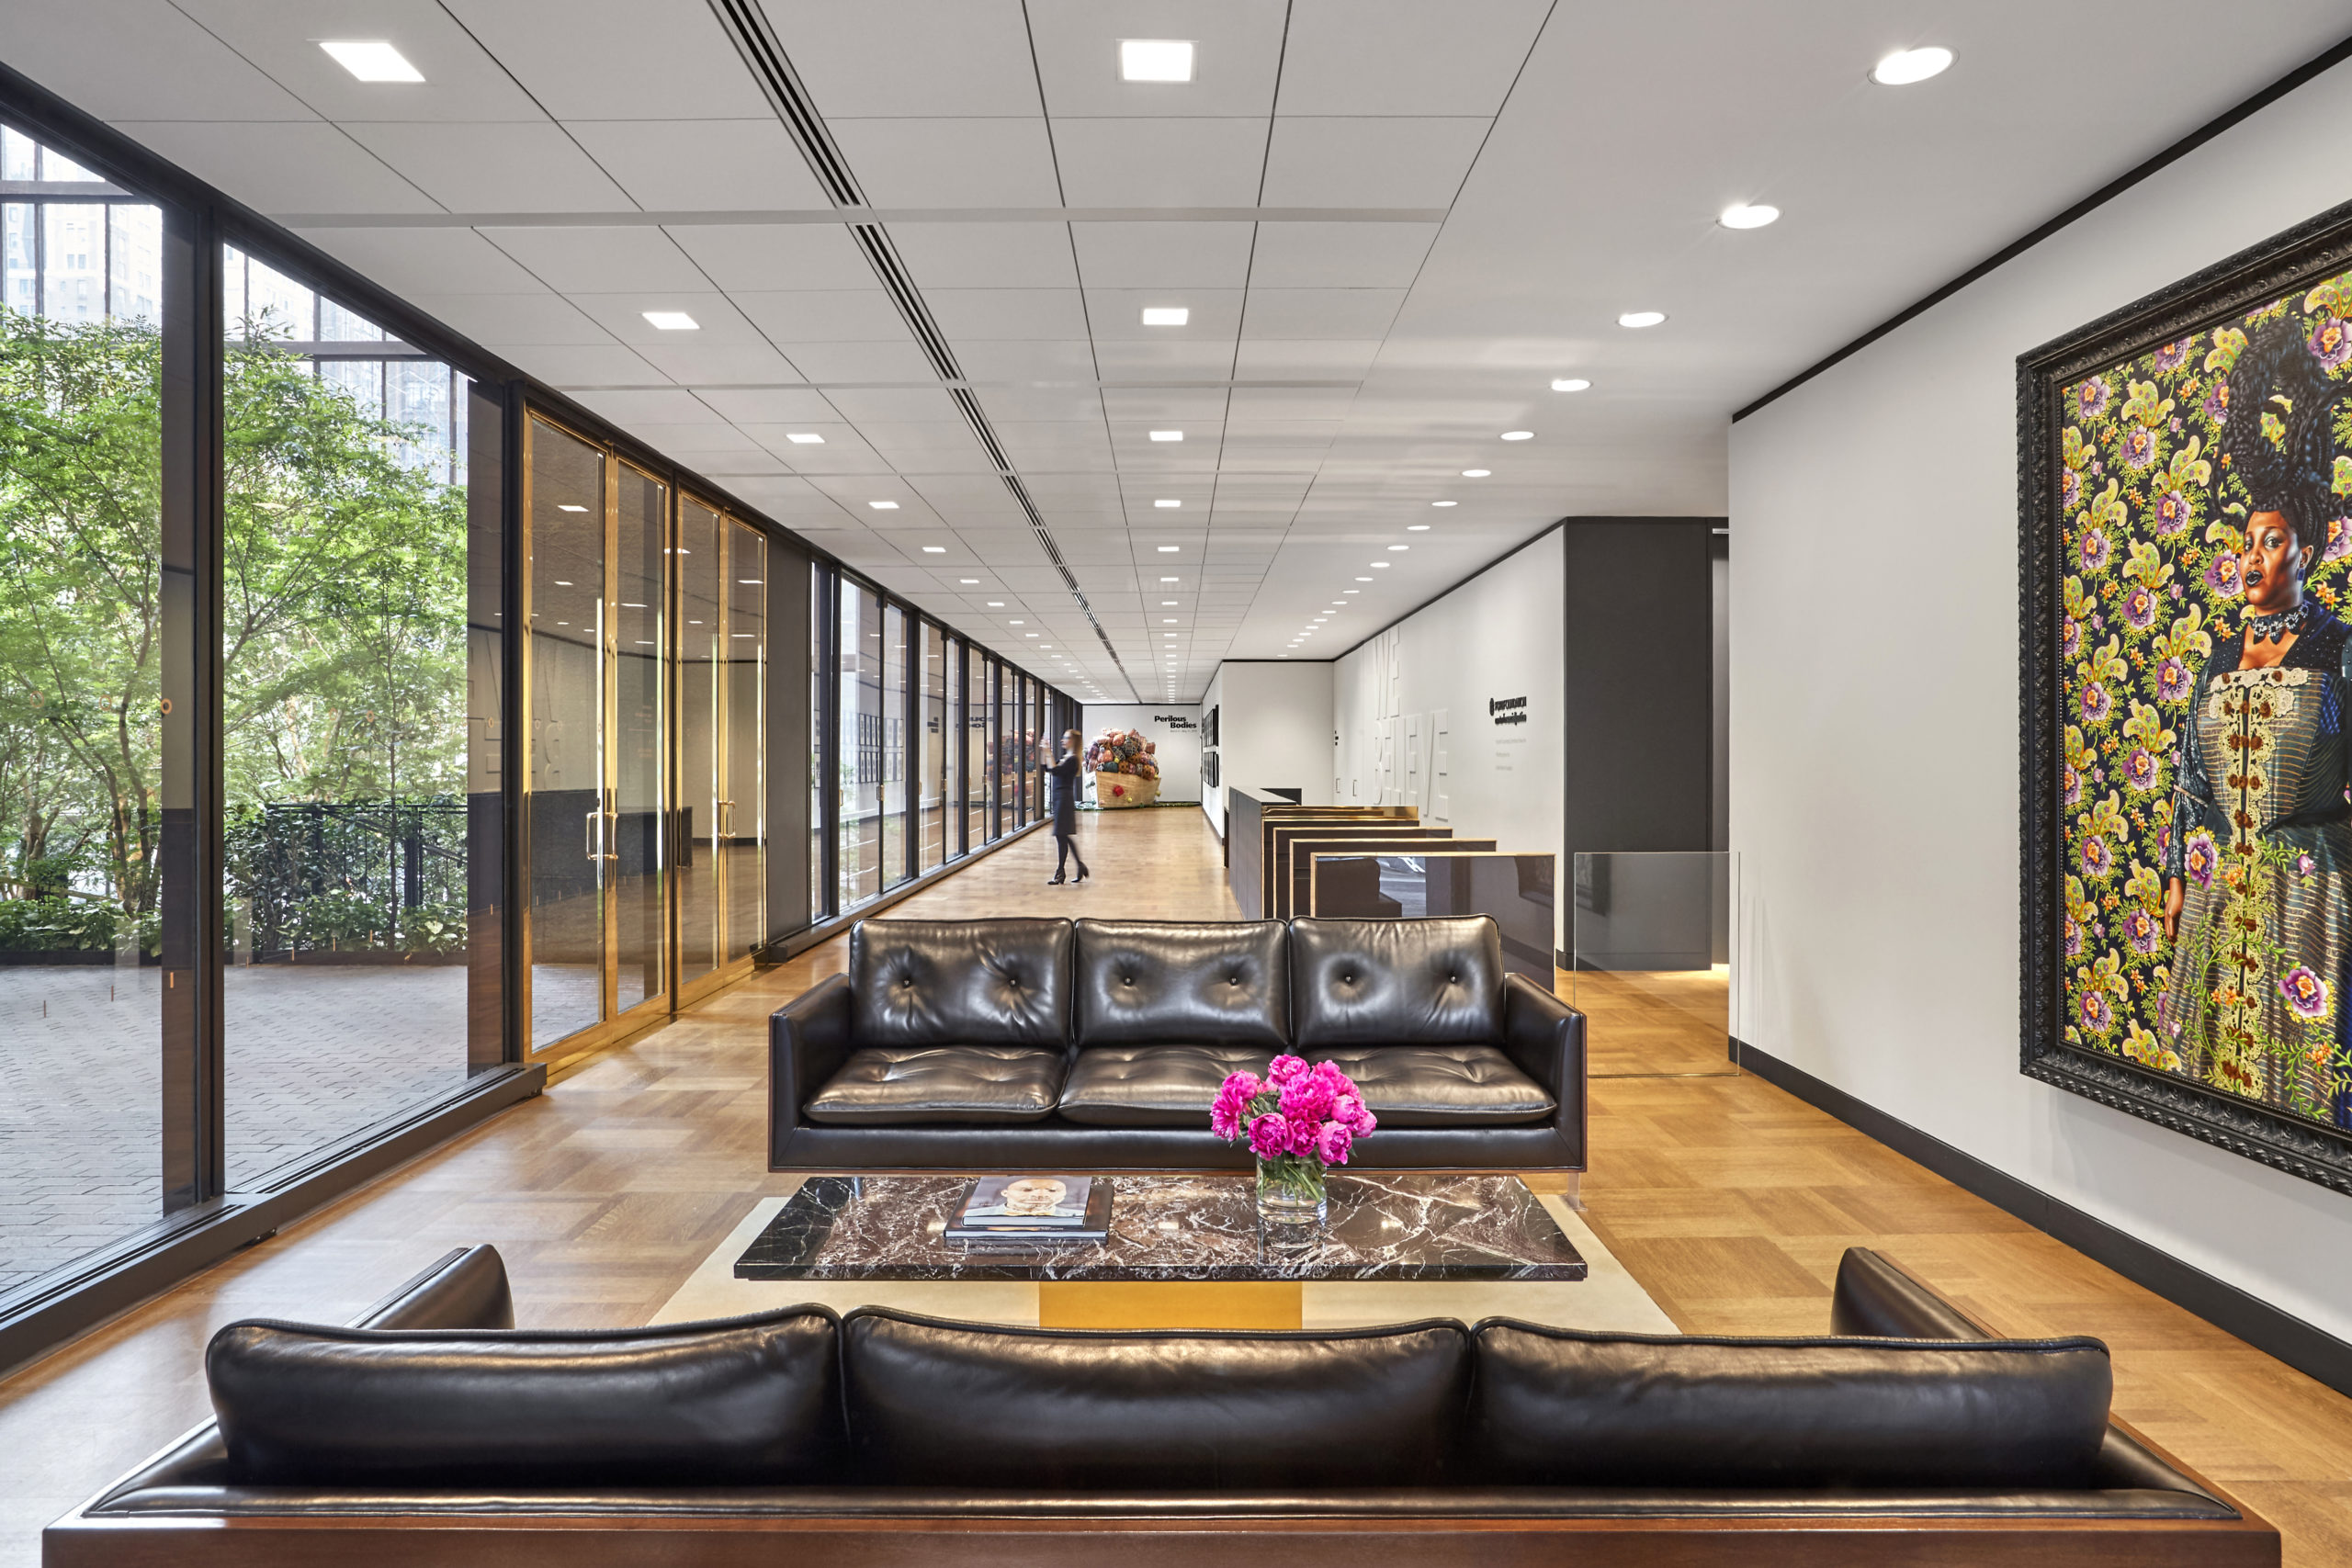 Interiors Honor Award: Ford Foundation for Social Justice Restoration by Gensler, Raymond Jungles, and SiteWorks, in New York, NY. Photo: Garrett Rowland/Gensler.